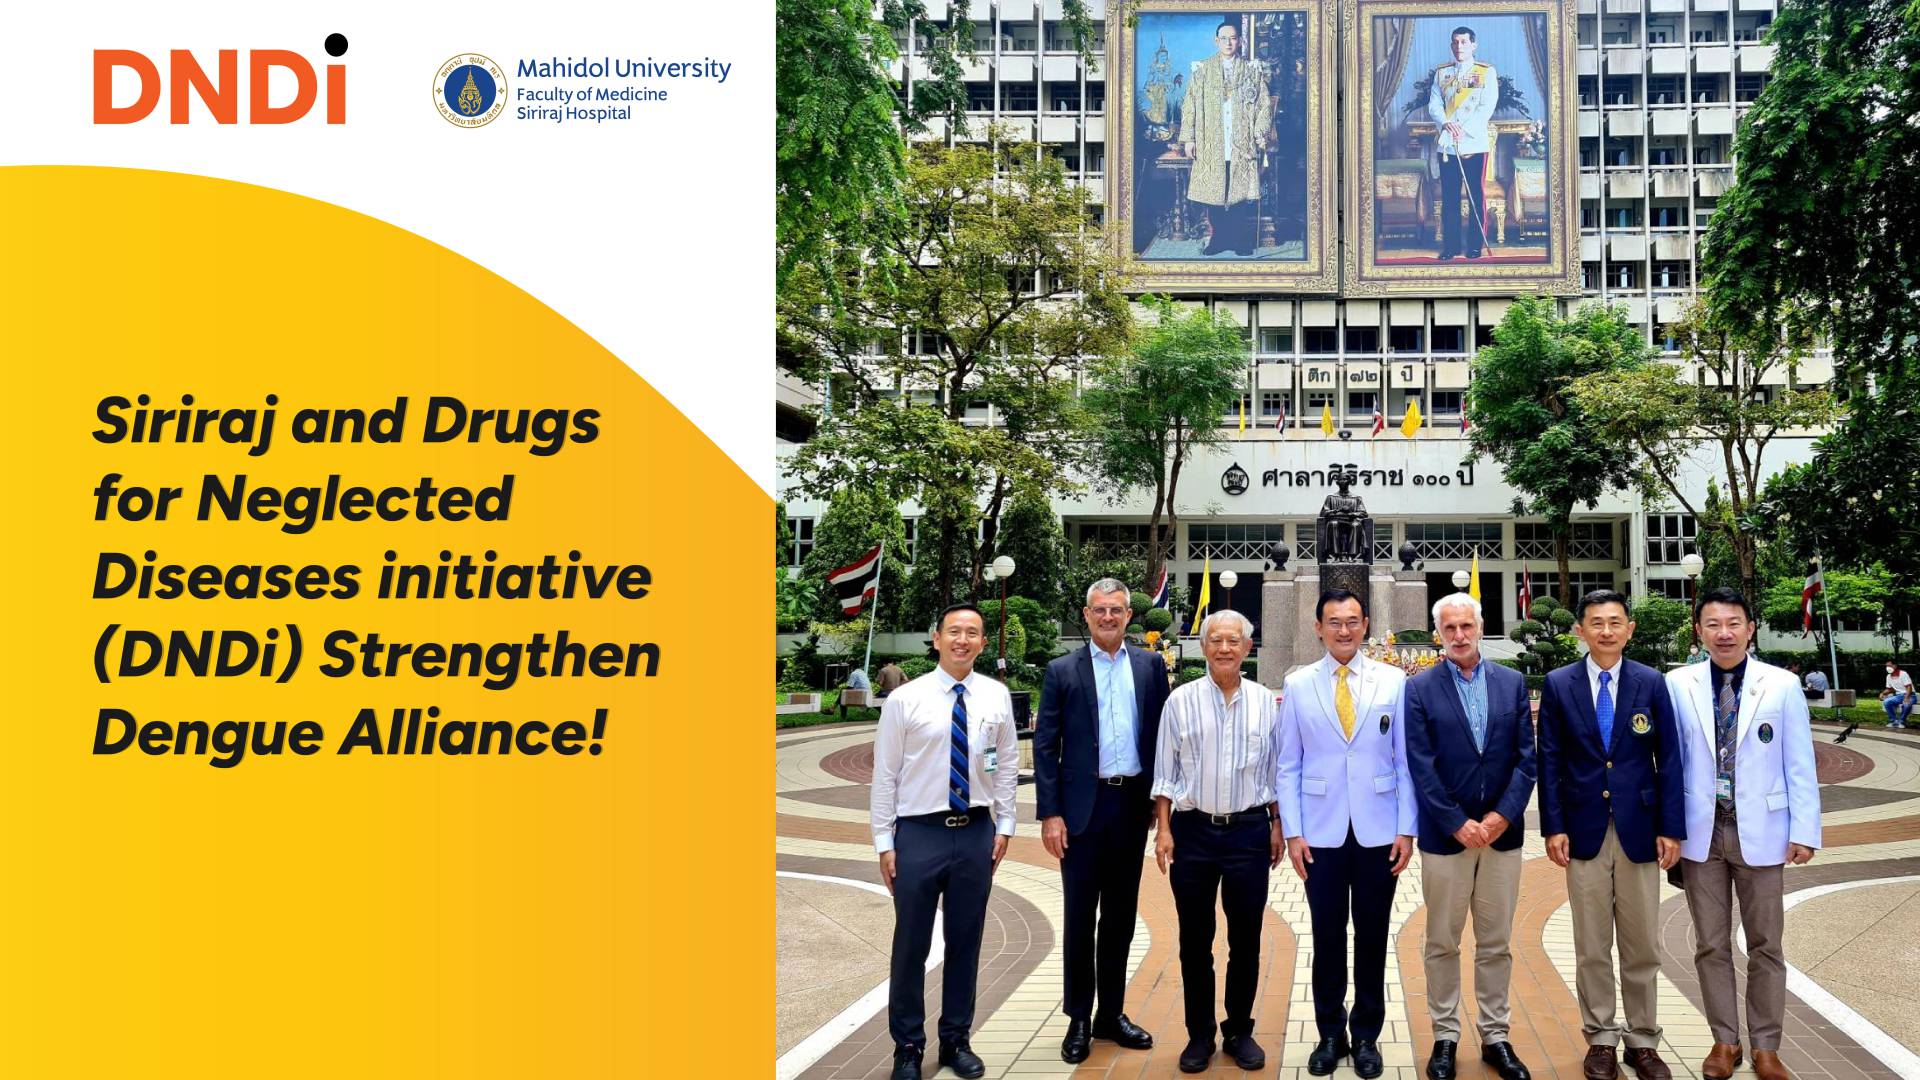 Siriraj and Drugs for Neglected Diseases initiative (DNDi) Strengthen Dengue Alliance!